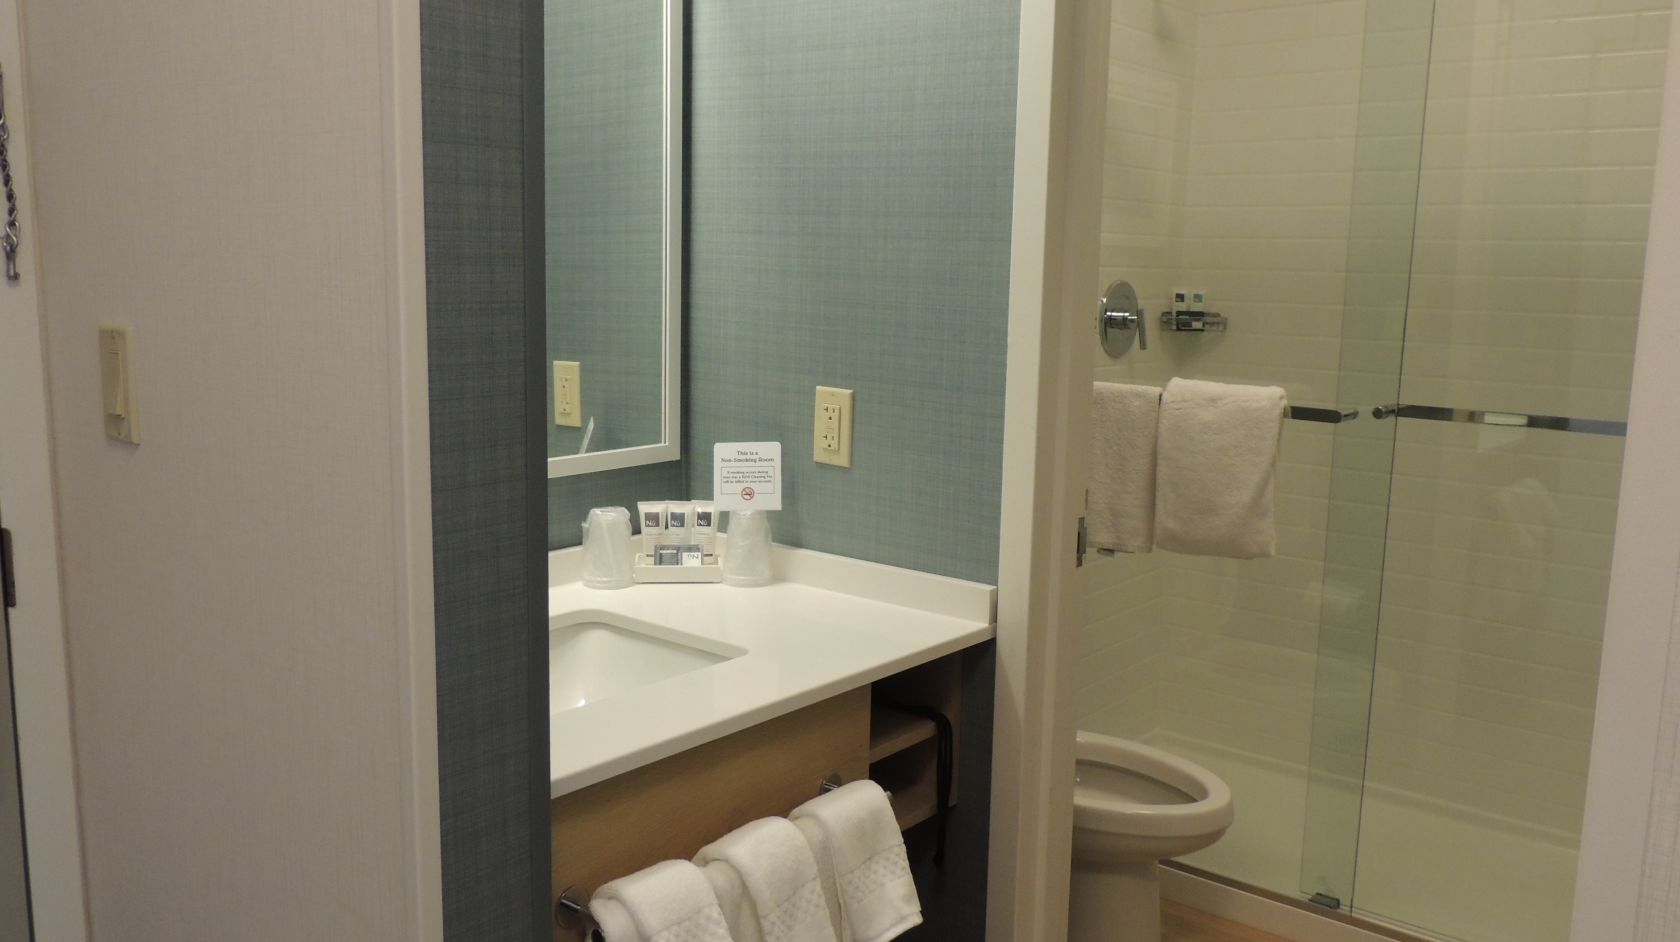 A White Sink Sitting Next To A Glass Shower Door